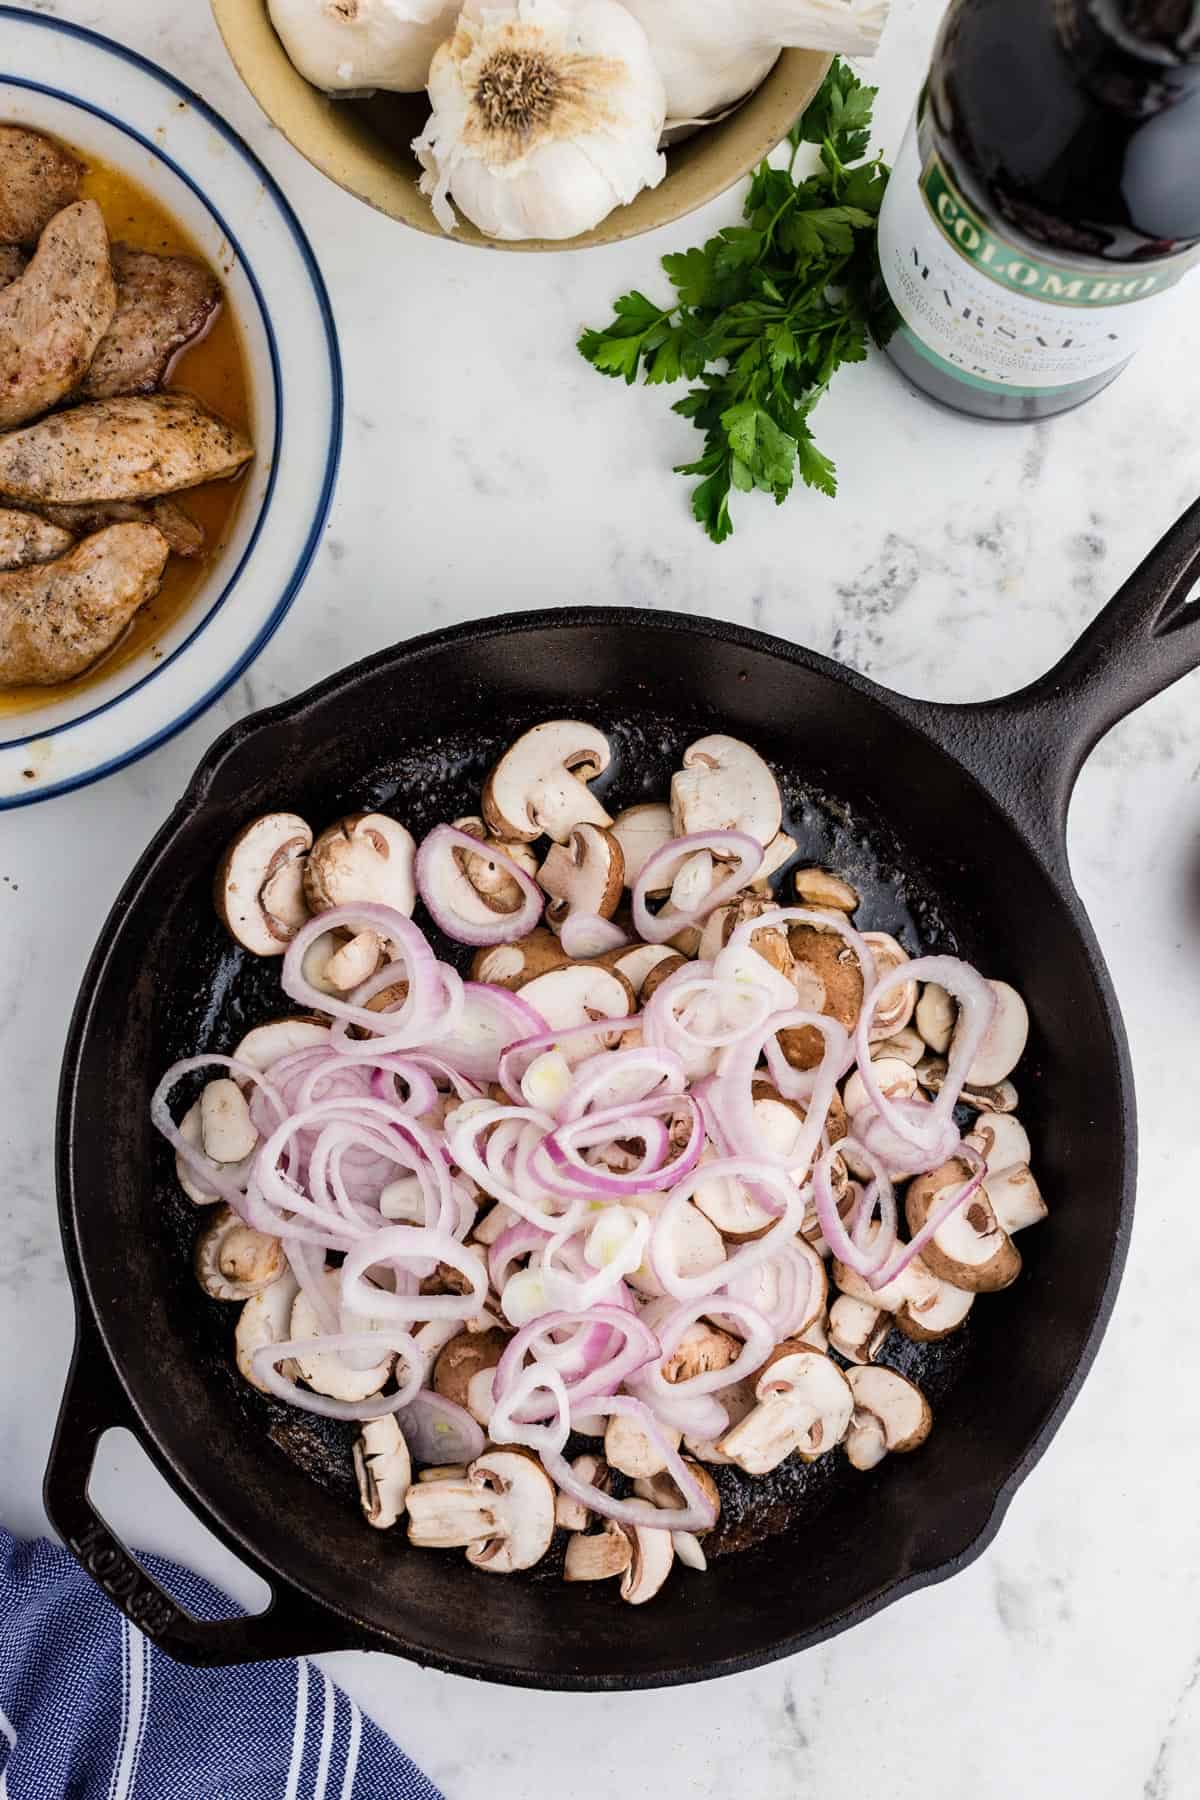 A skillet of uncooked mushrooms and scallions.